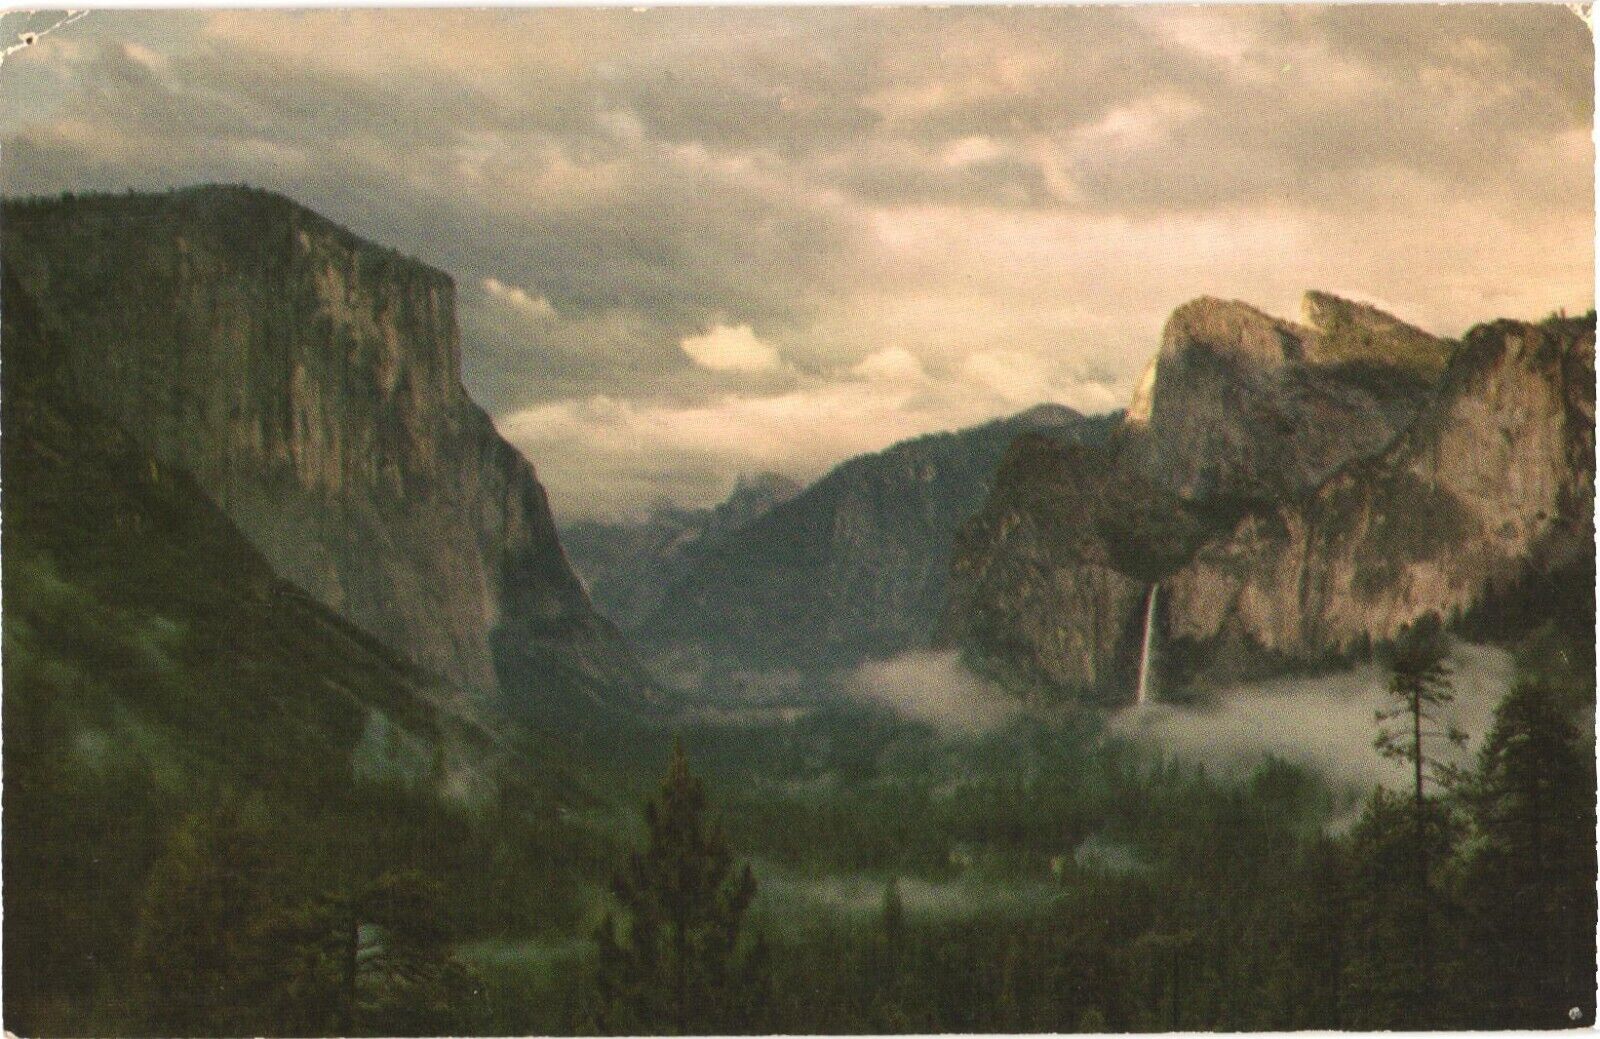 Breath-taking View of Yosemite Valley From Wawona Tunnel, Storm Postcard